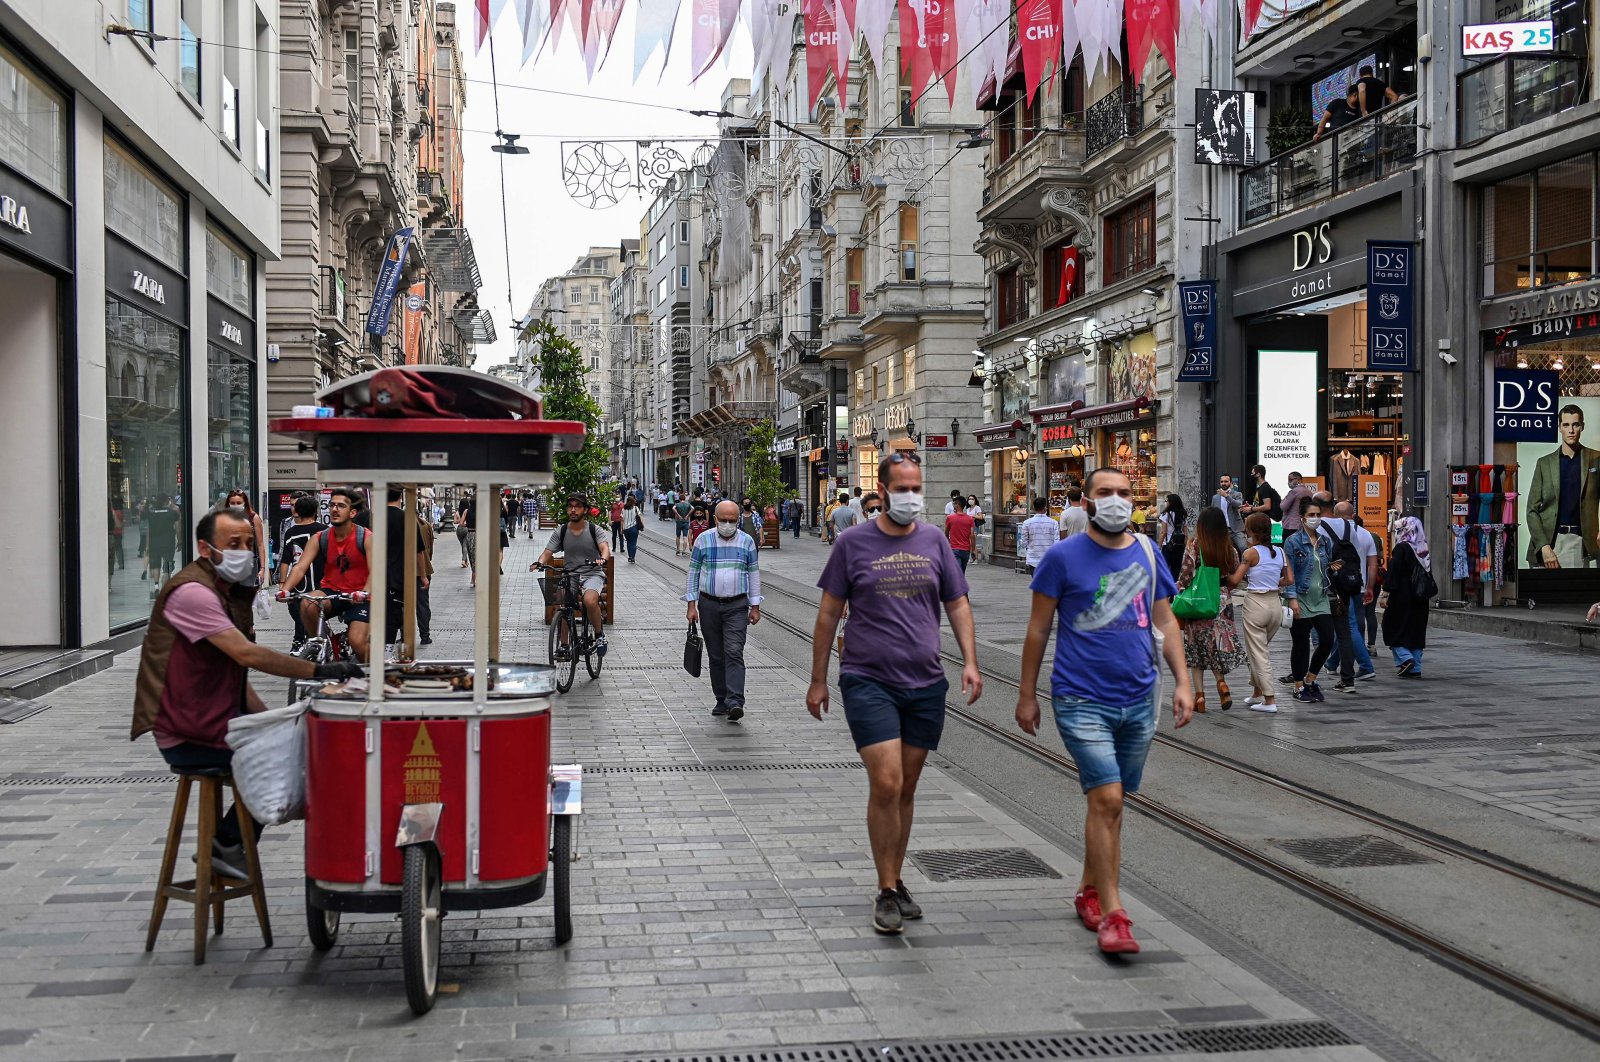 People wearing protective face masks to curb the coronavirus spread walk in popular shopping avenue Istiklal, Istanbul, June 25, 2020. (AFP Photo)